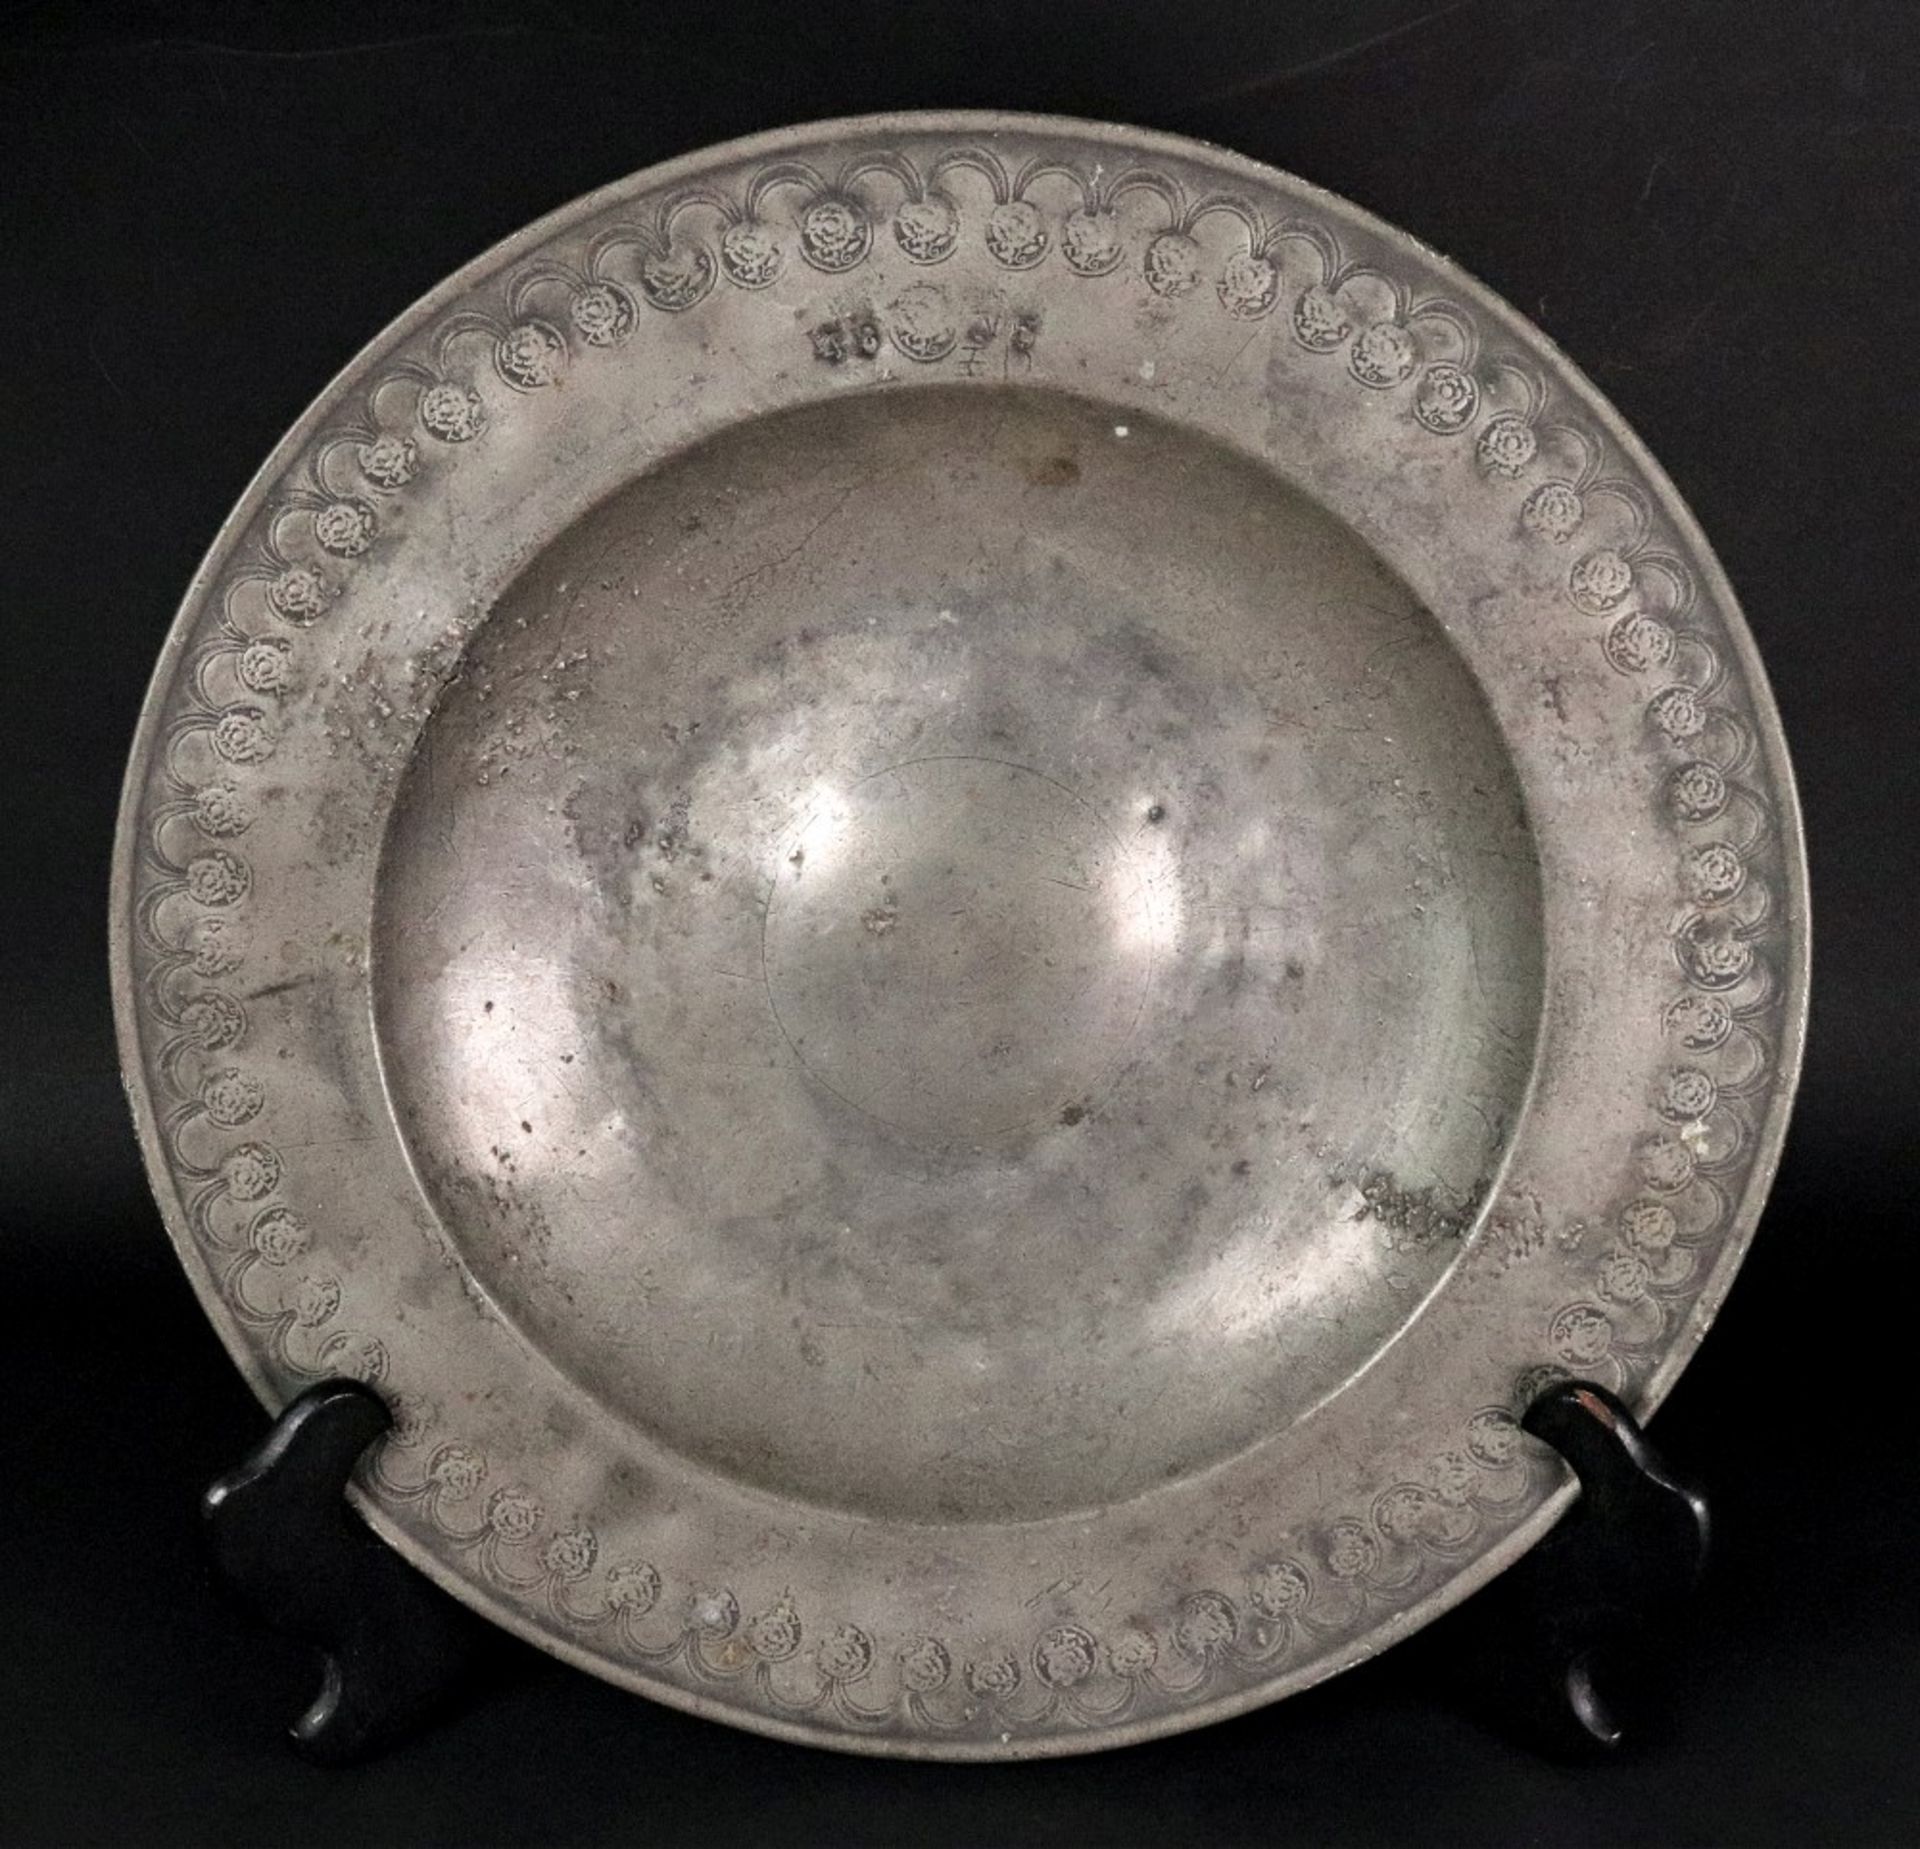 A broad rimmed pewter charger, 17th century, with punched arcading linked by repeated makers mark T.